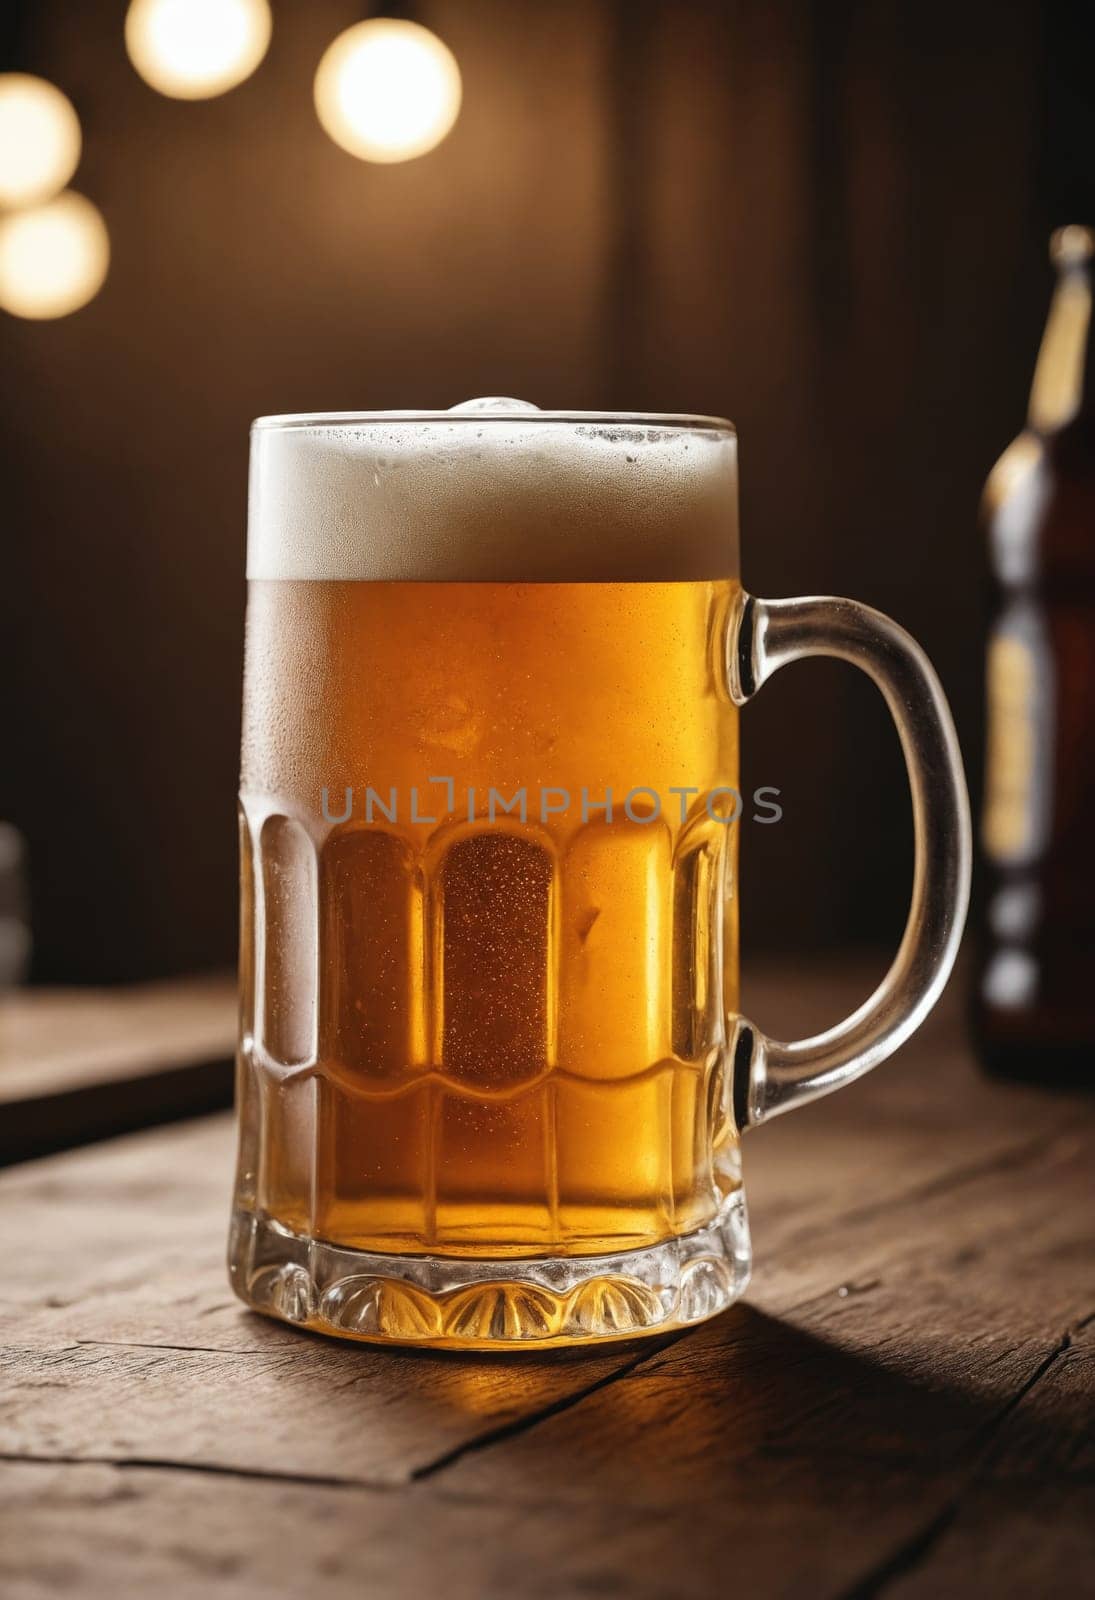 Beer glass on wooden table, part of serveware and barware collection by Andre1ns